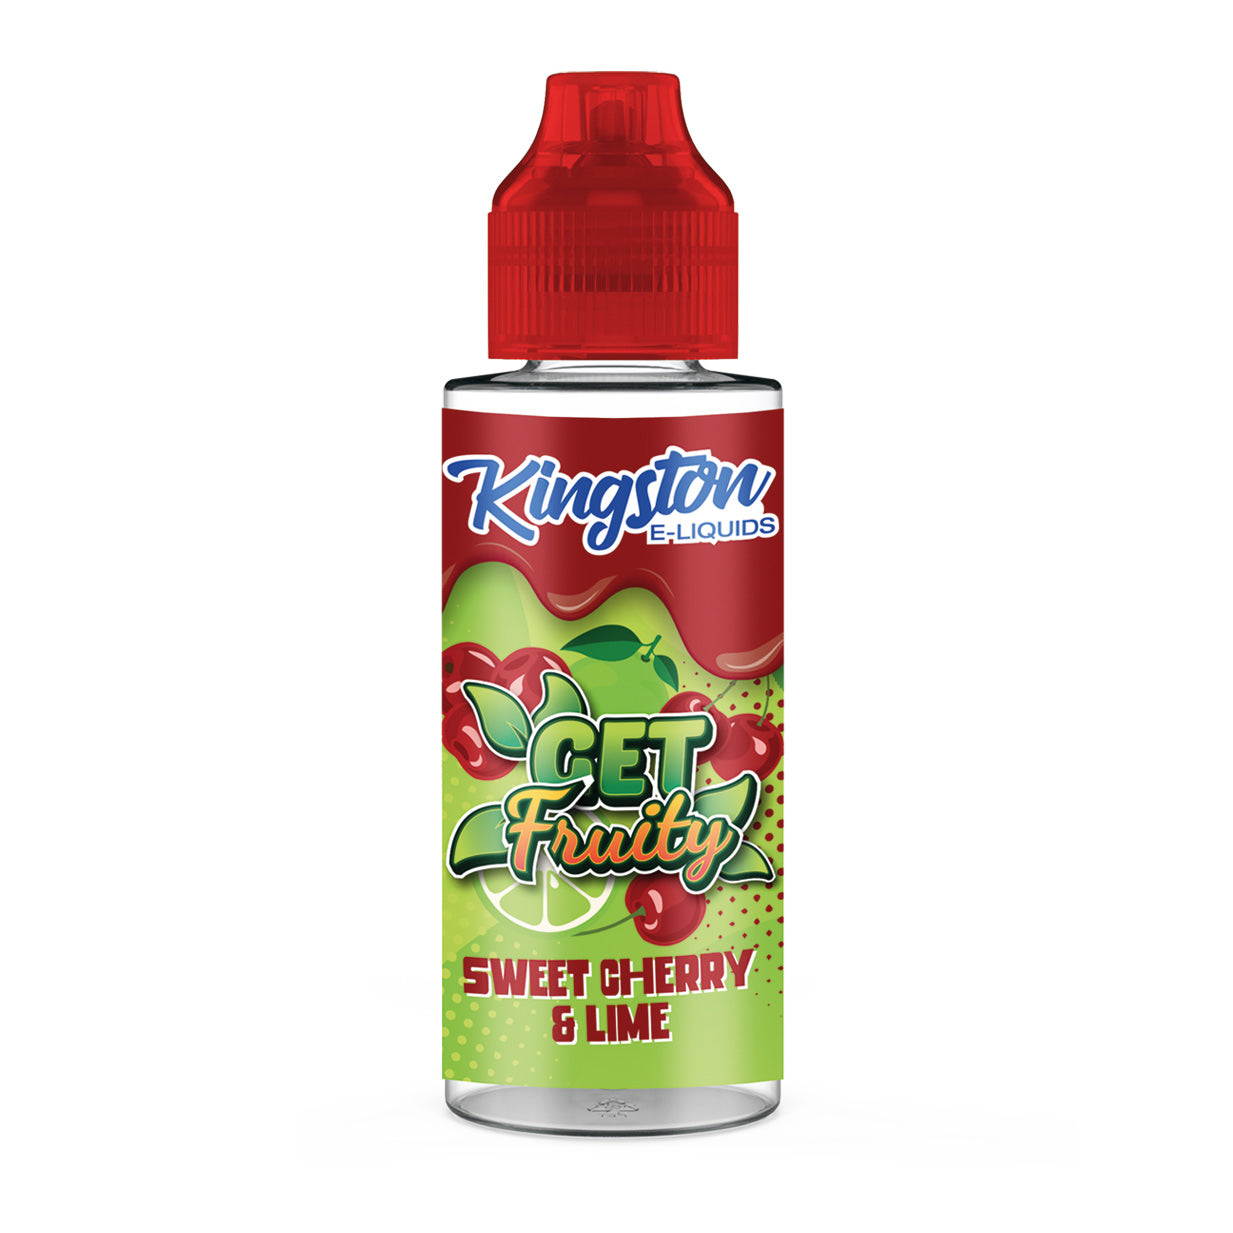 Sweet Cherry & Lime by Kingston 120ML